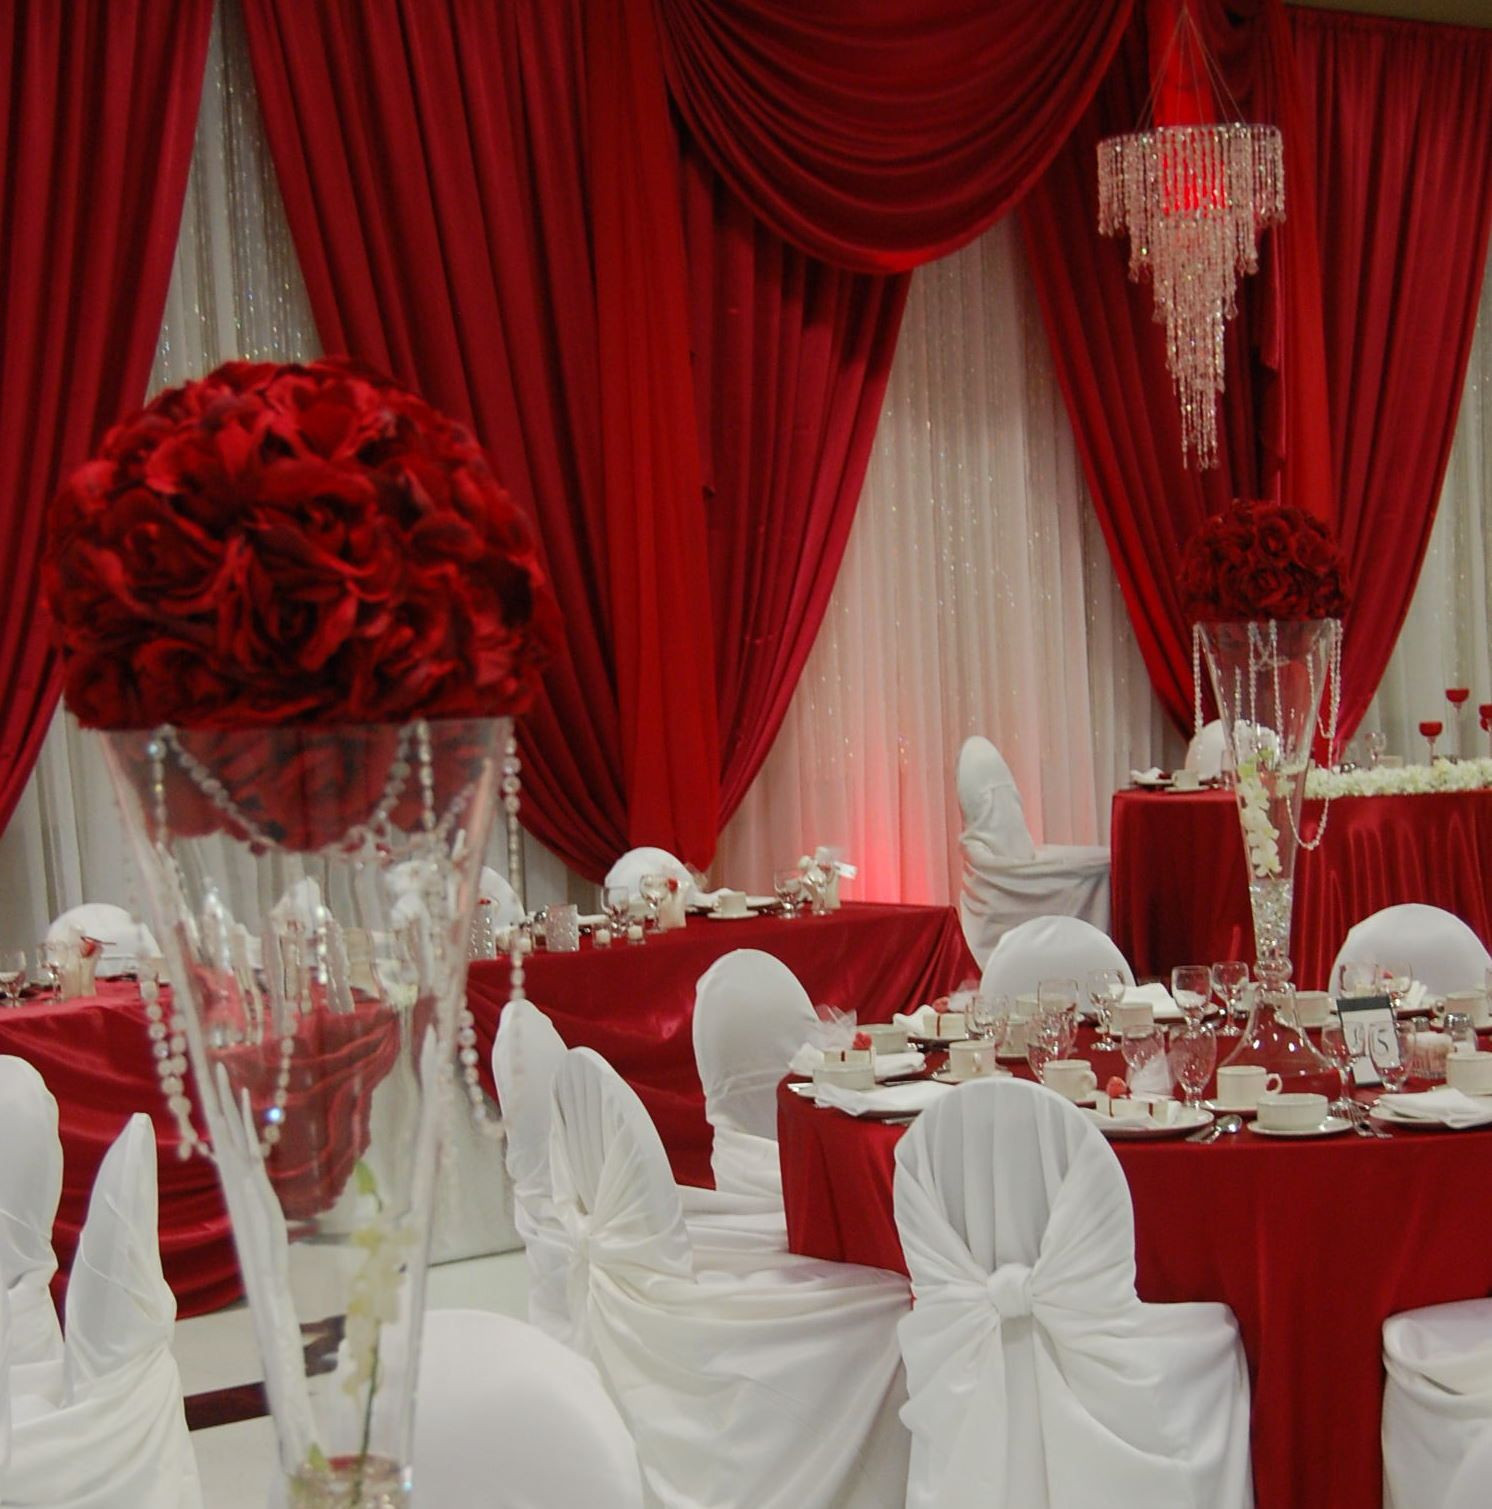 Red Black And White Wedding Decorations
 oh my never been a fan of red and white weddings but this